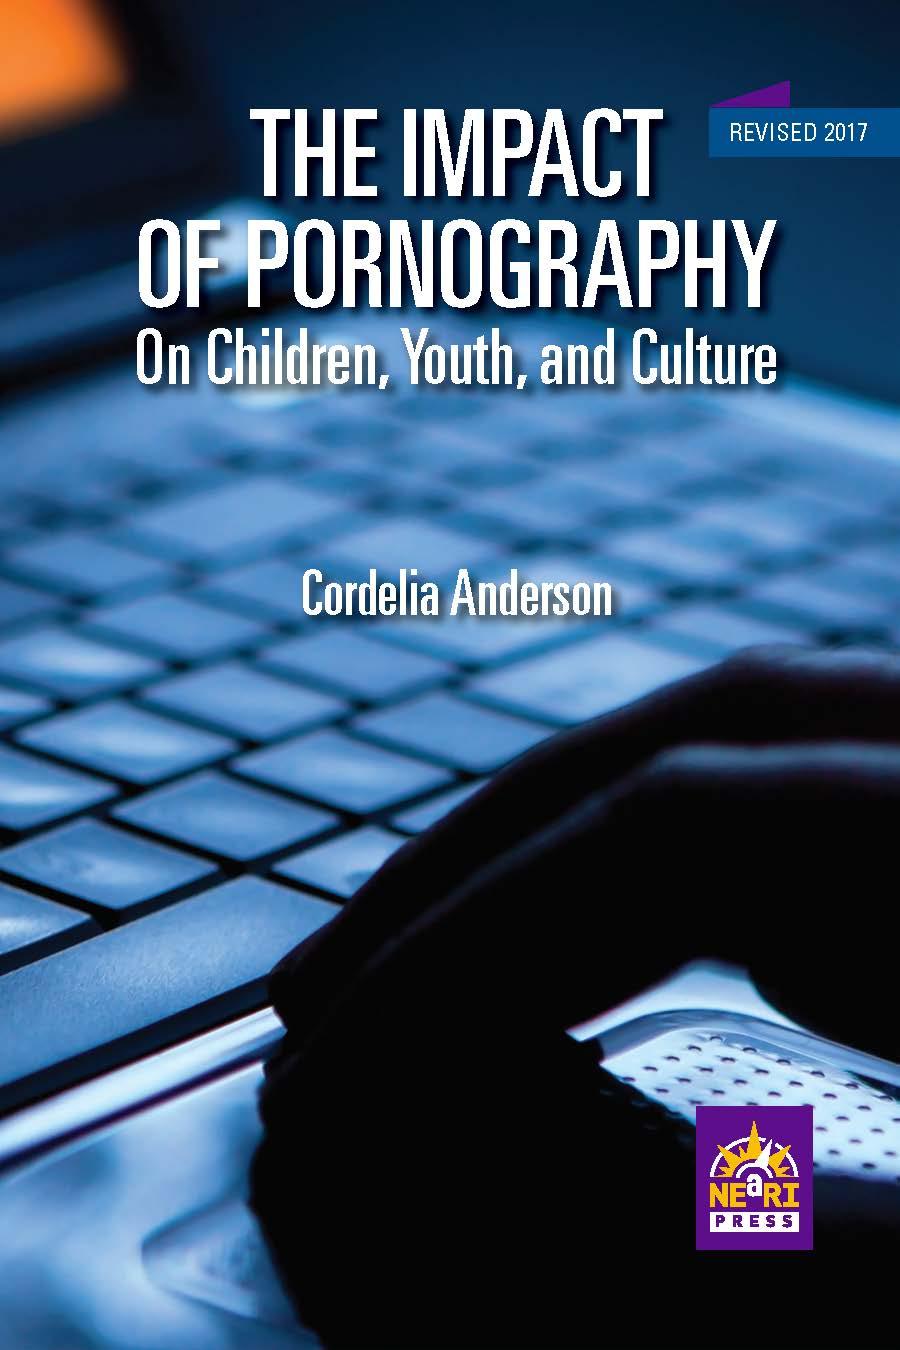 The Impact of Pornography on Children, Youth and Culture